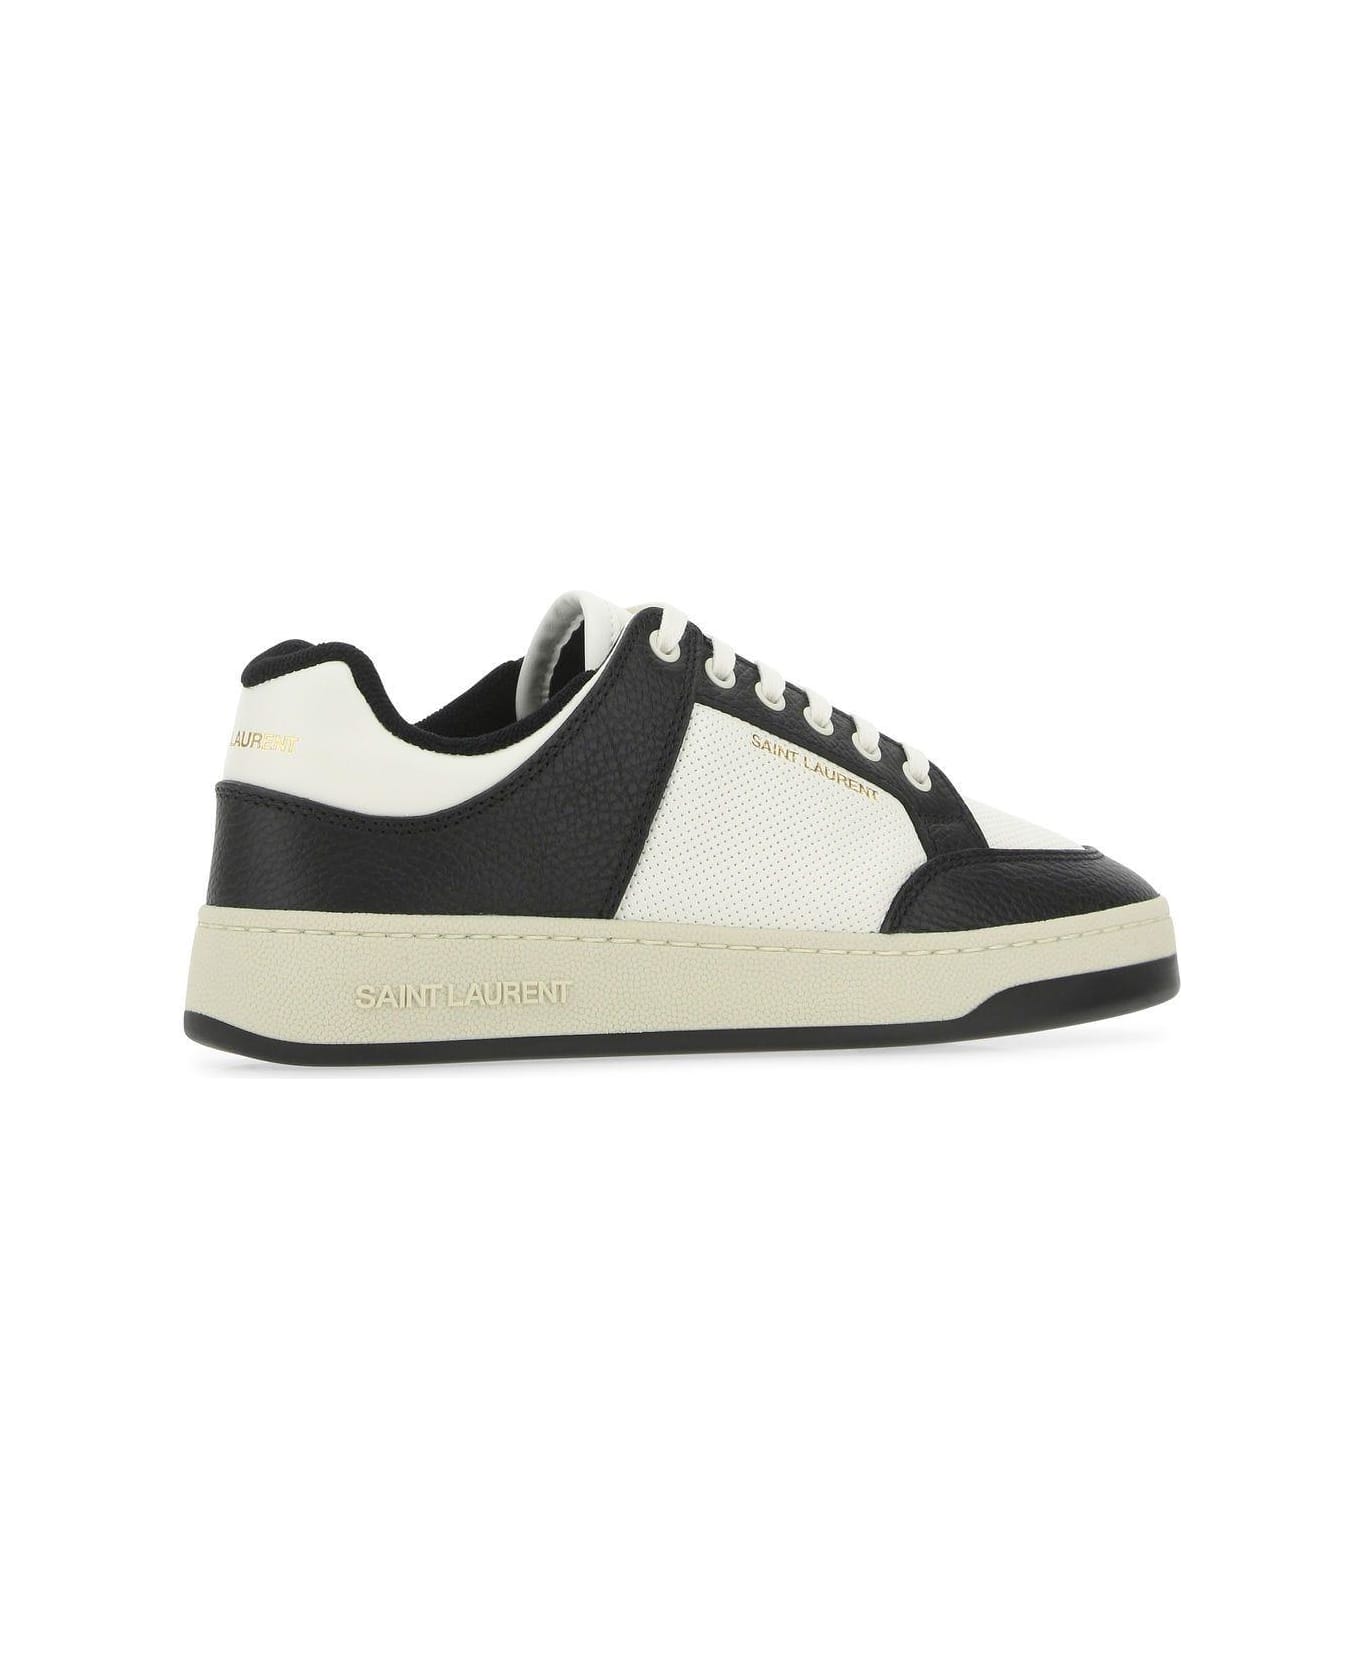 Saint Laurent Two-tone Leather Sl/61 Sneakers - BROWN